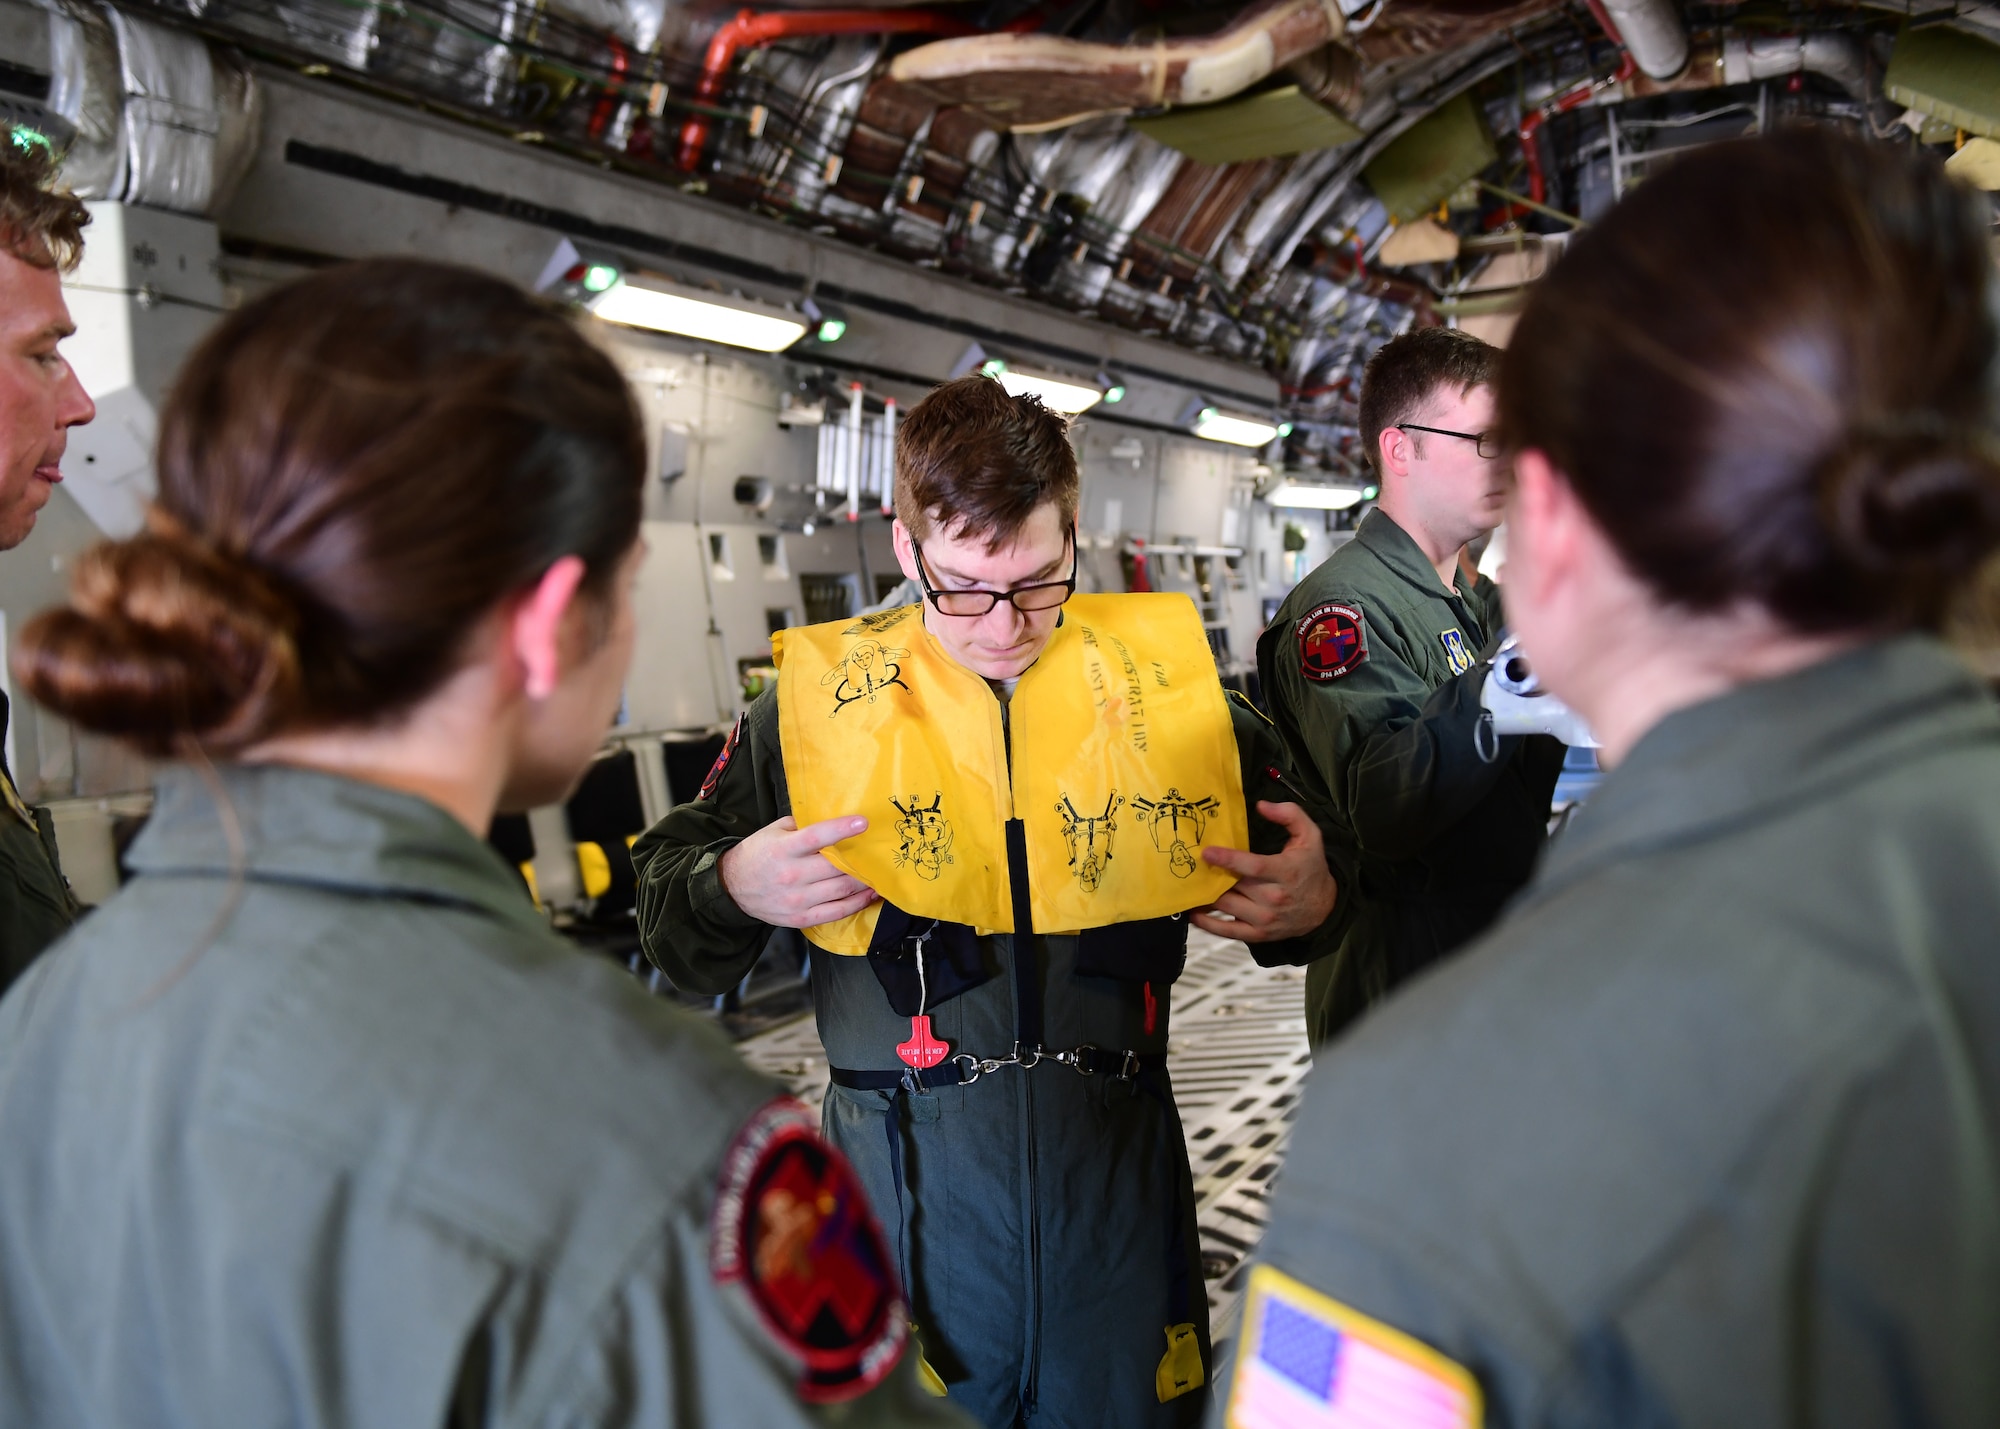 Staff Sgt. John Klobushnik, 914th Aeromedical Evacuation Squadron medical technician, teaches other medical technicians from the 914th AES about proper life vest procedures at Barbers Point Airfield, Hawaii April 24, 2019. This was the last of the safety procedures before the flight took off and dissimilar aircraft training began. (U.S. Air Force photo by Senior Airman Grace Thomson)